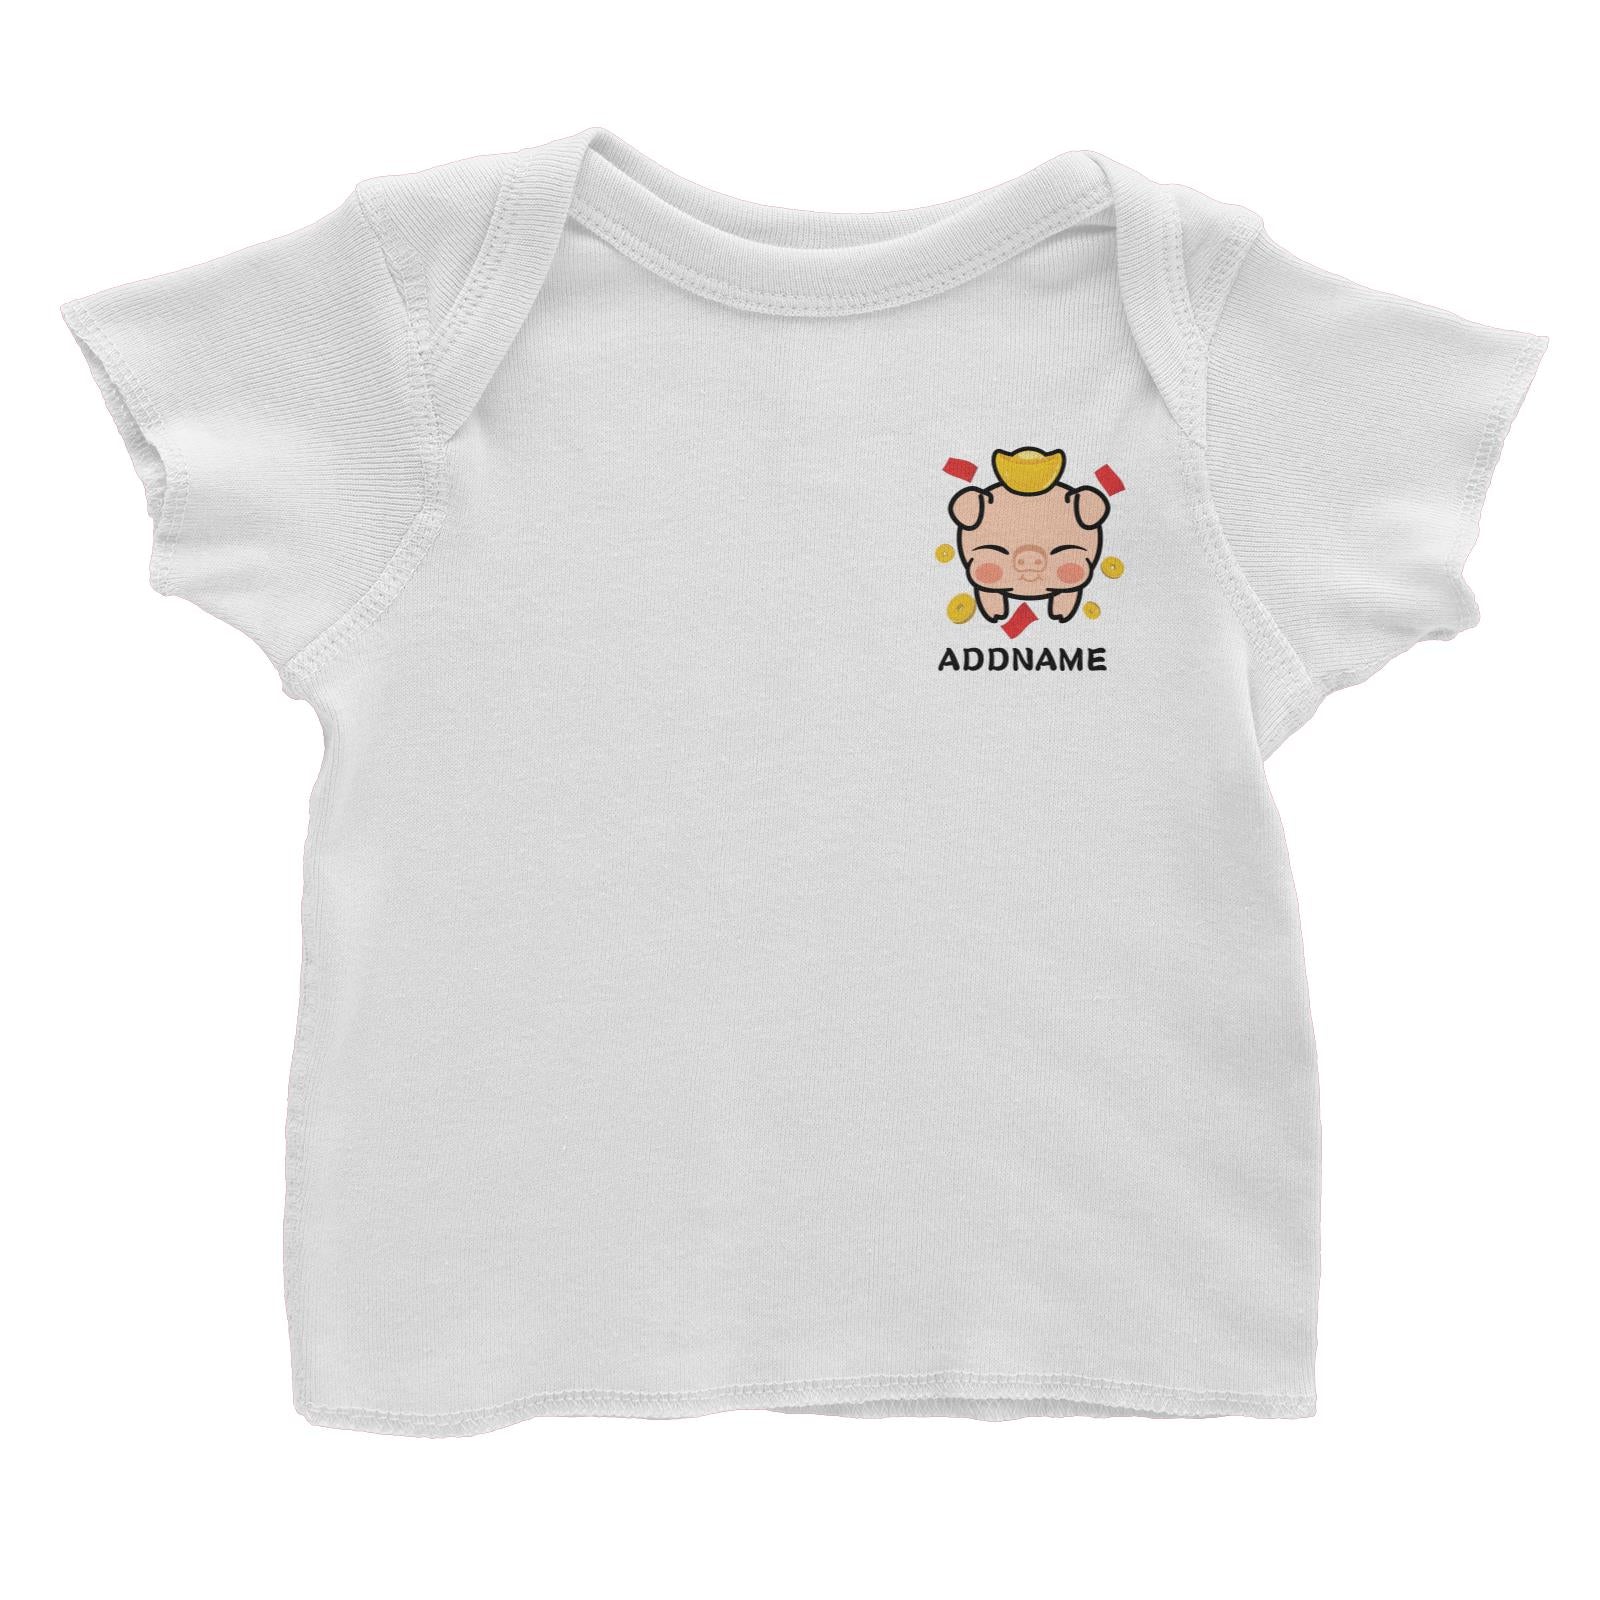 Prosperity Pig Baby Head with Gold Pocket Design Baby T-Shirt